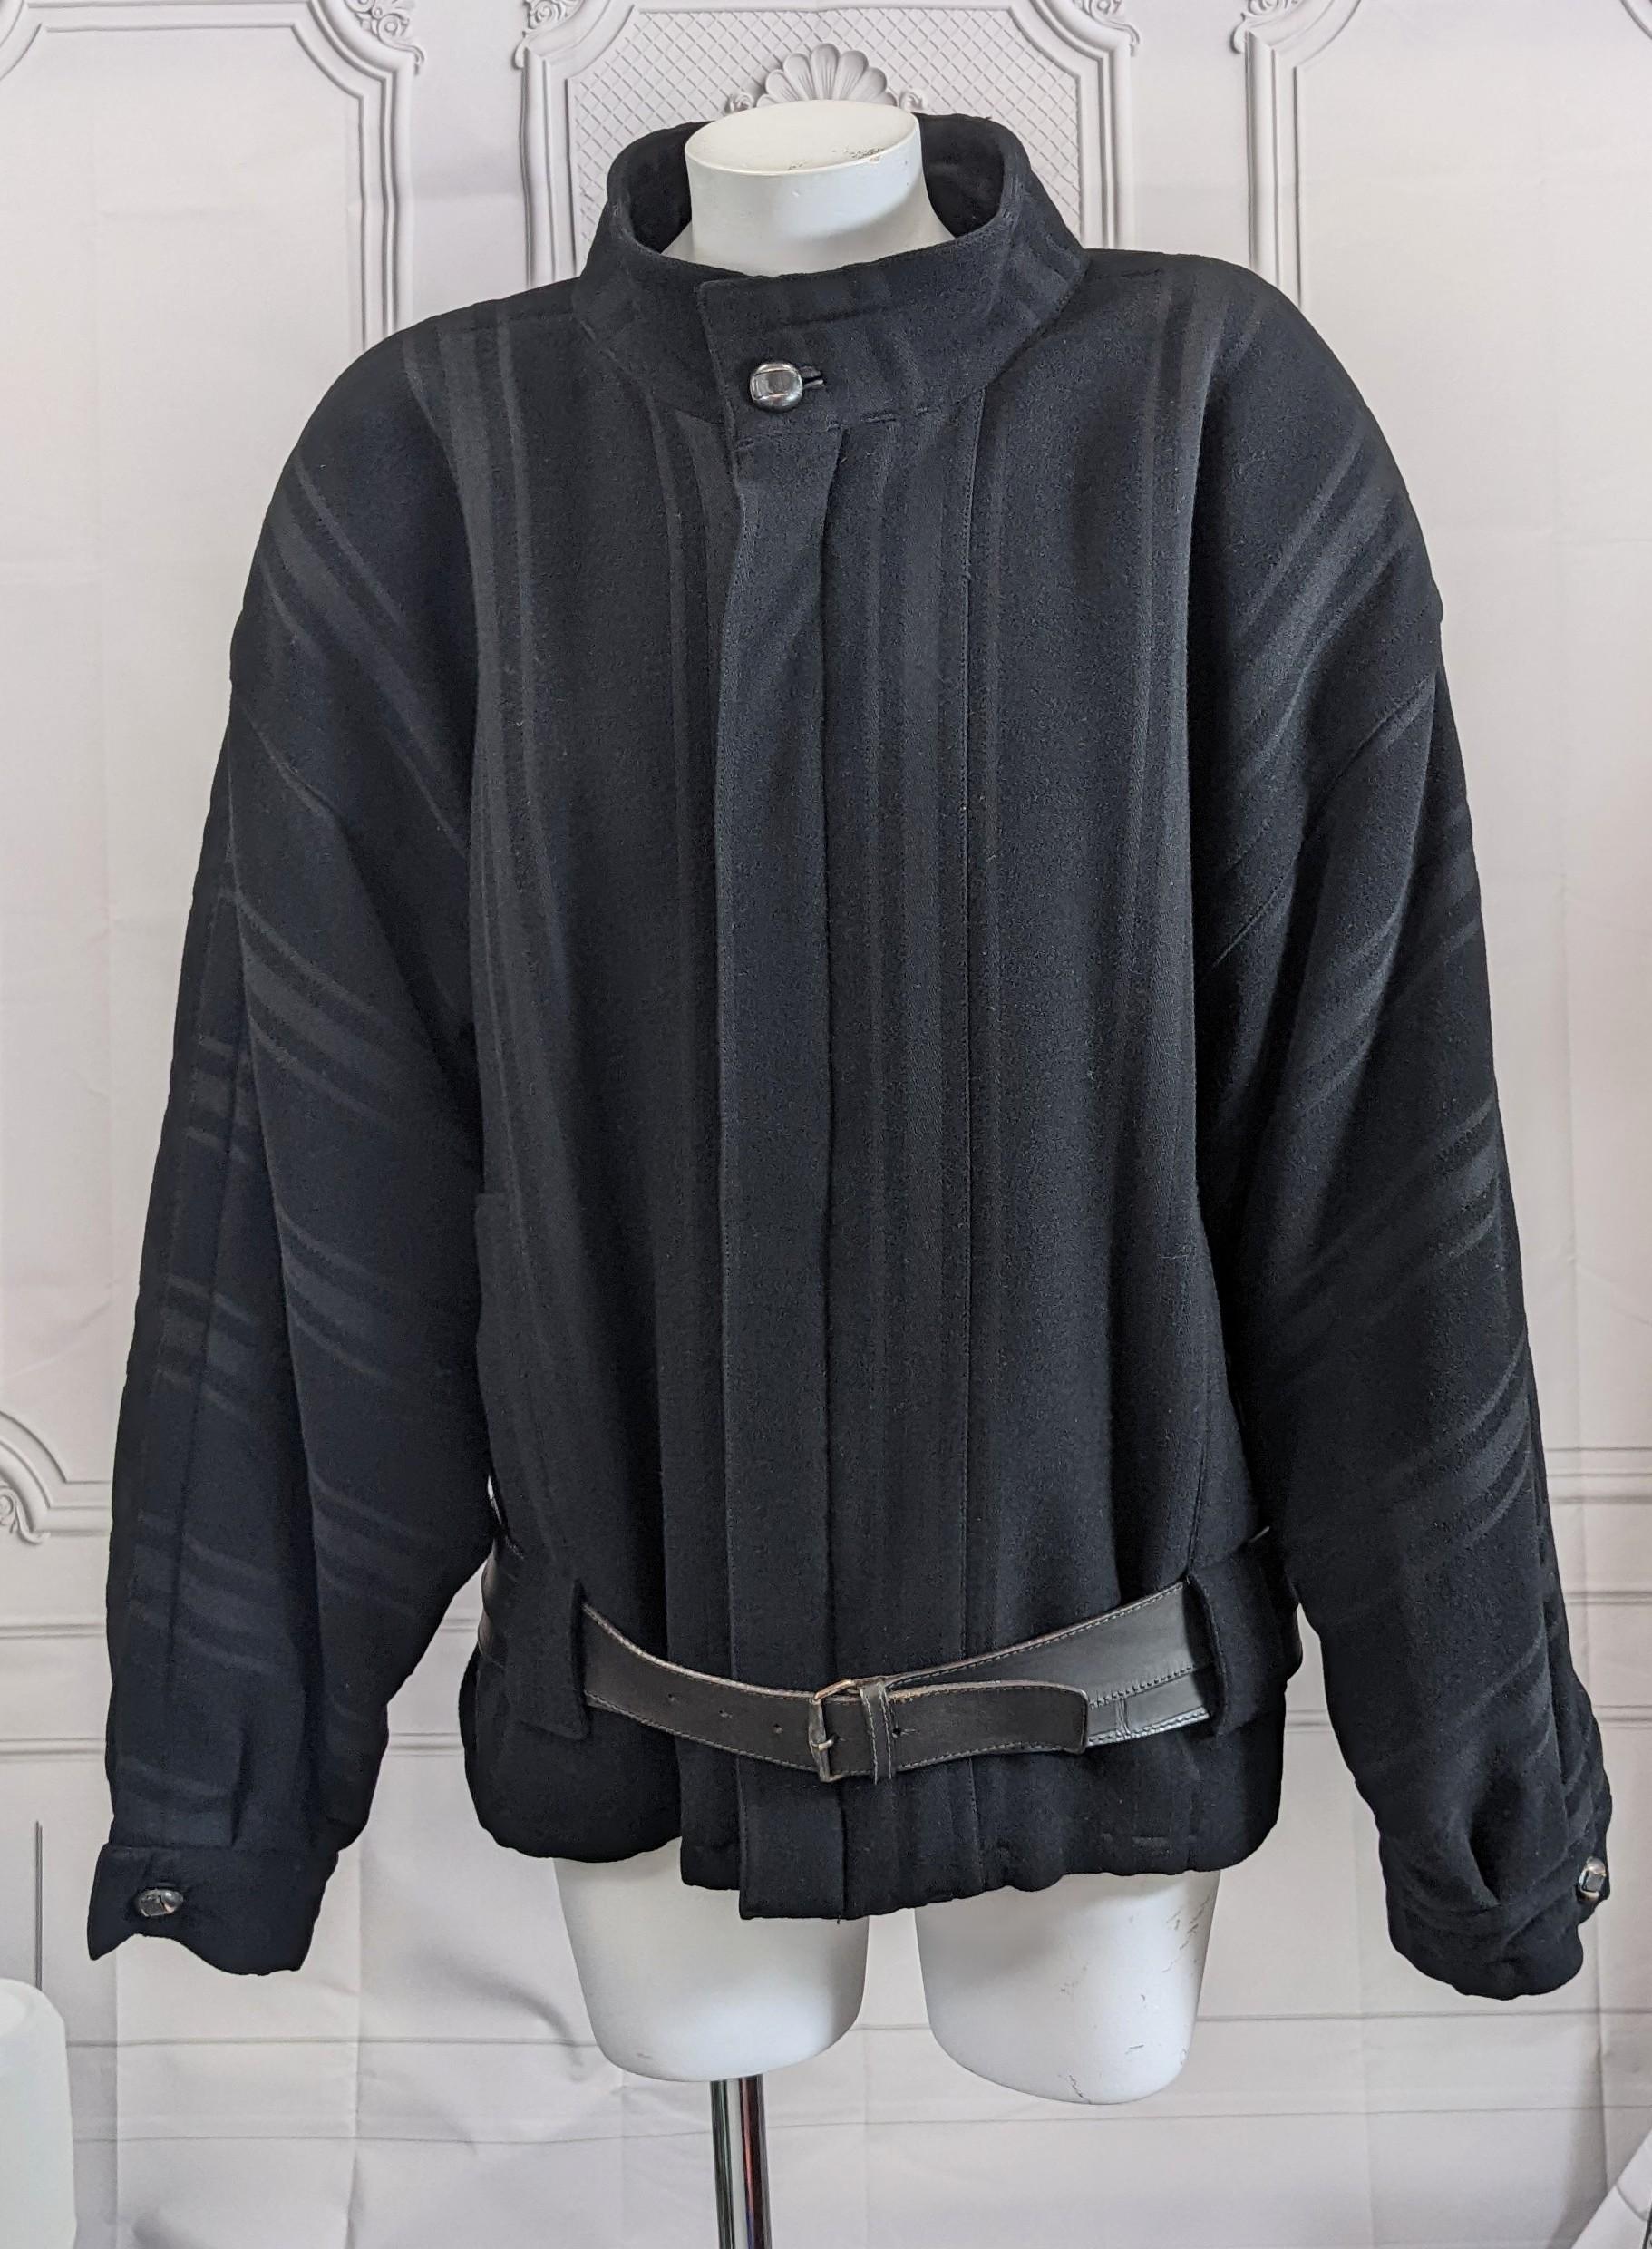 Iconic Gianni Versace Mens Bomber from the 1980's. Striped Charcoal Gray Wool cut with deep dolman sleeves and attached leather belt of smooth and faux alligator grains. Copper toned metal buttons and buckle trimmed in leather. Slashed pockets turn